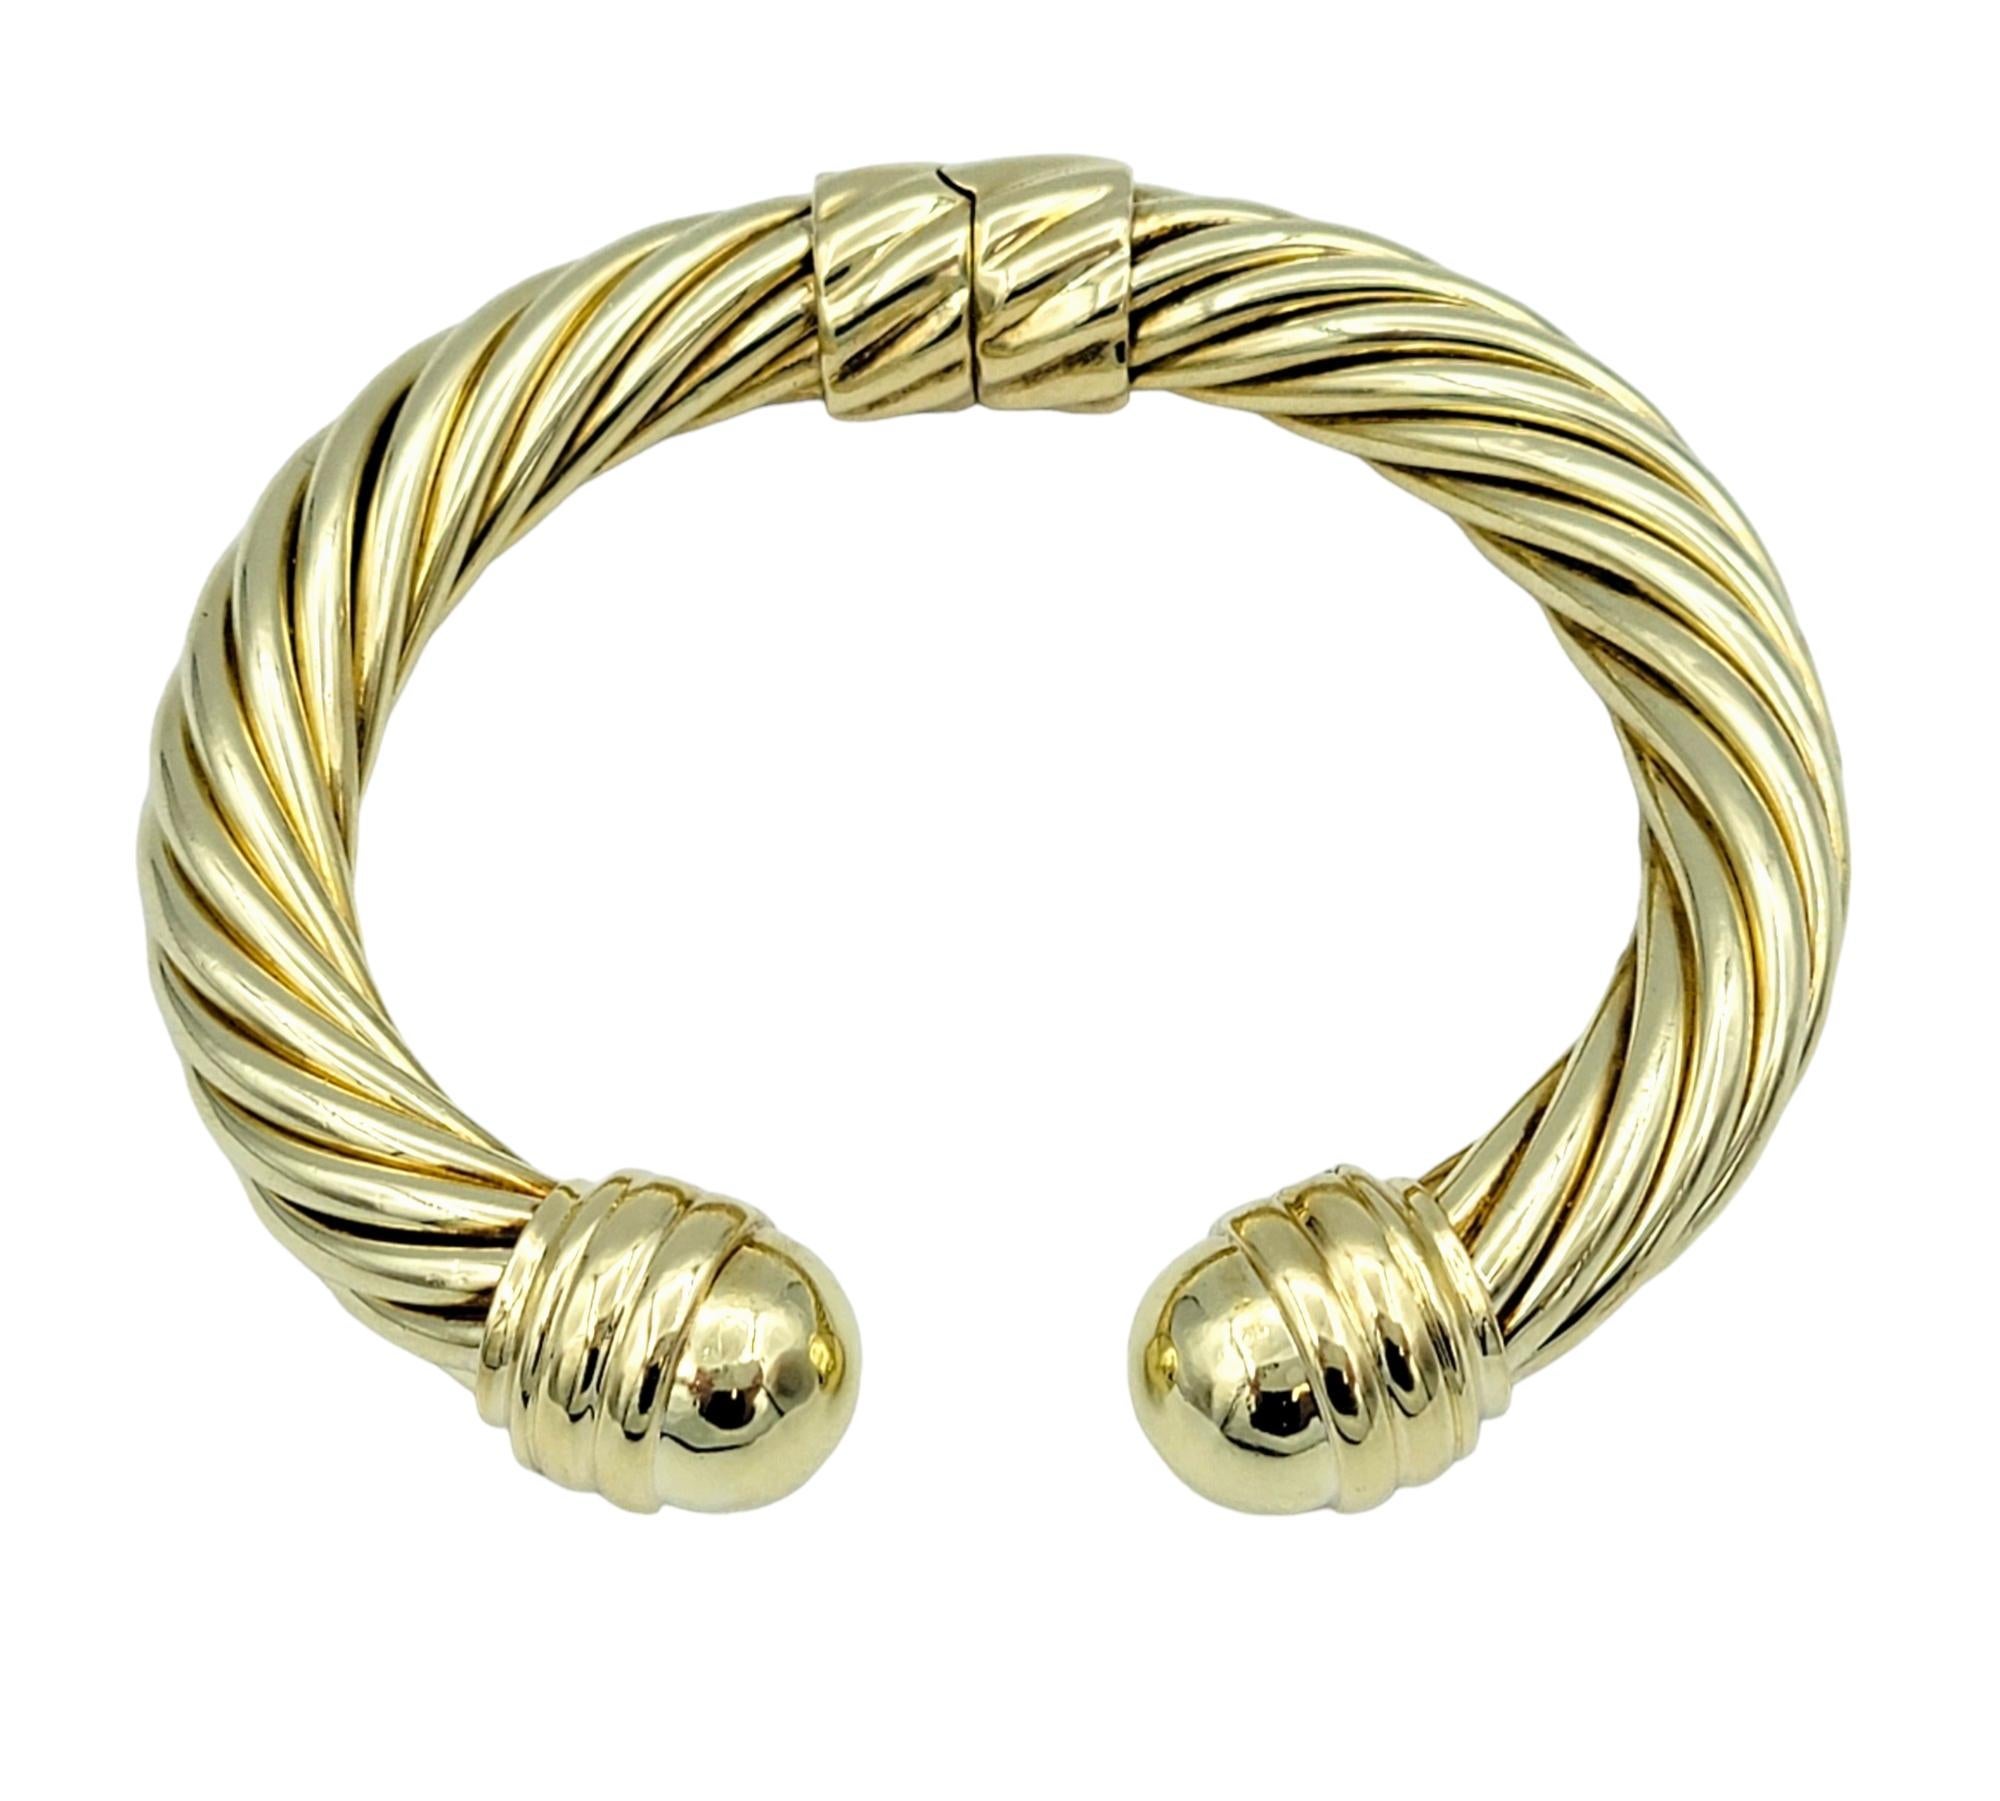 The David Yurman Cable Classics cuff bracelet, crafted in luxurious 14 karat yellow gold, is a timeless and iconic piece of jewelry. Its design features the brand's signature twisted cable motif, showcasing meticulous craftsmanship and attention to